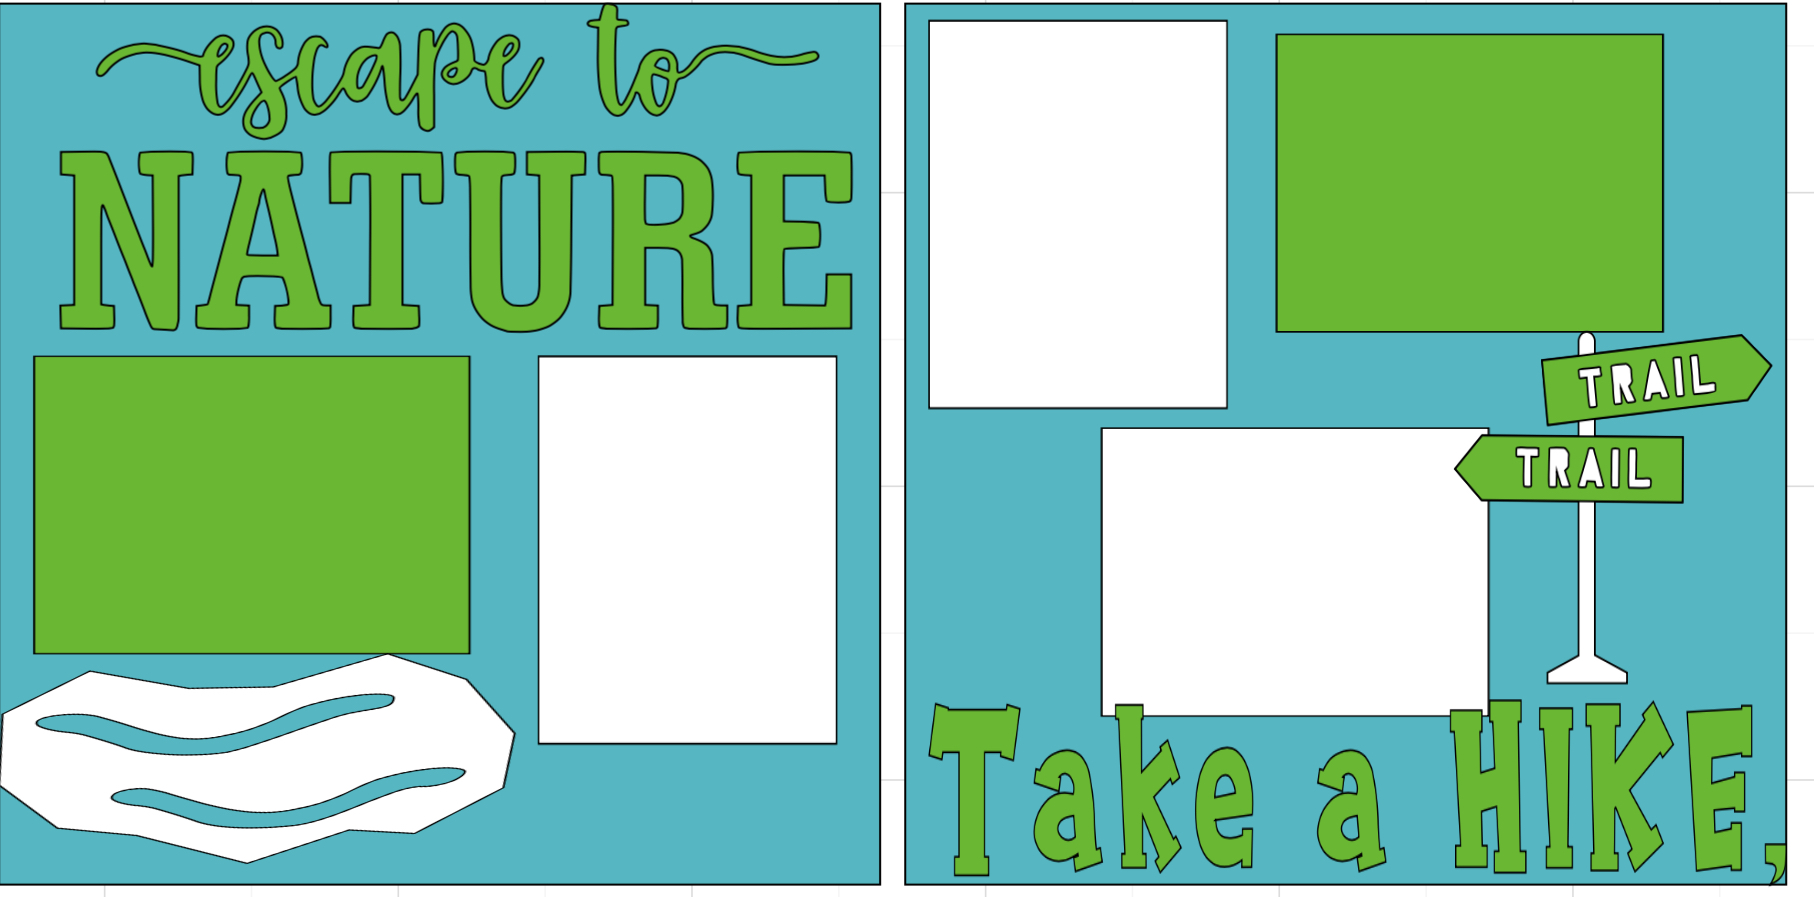 2020-4 Escape to nature hiking DIE CUT ONLY